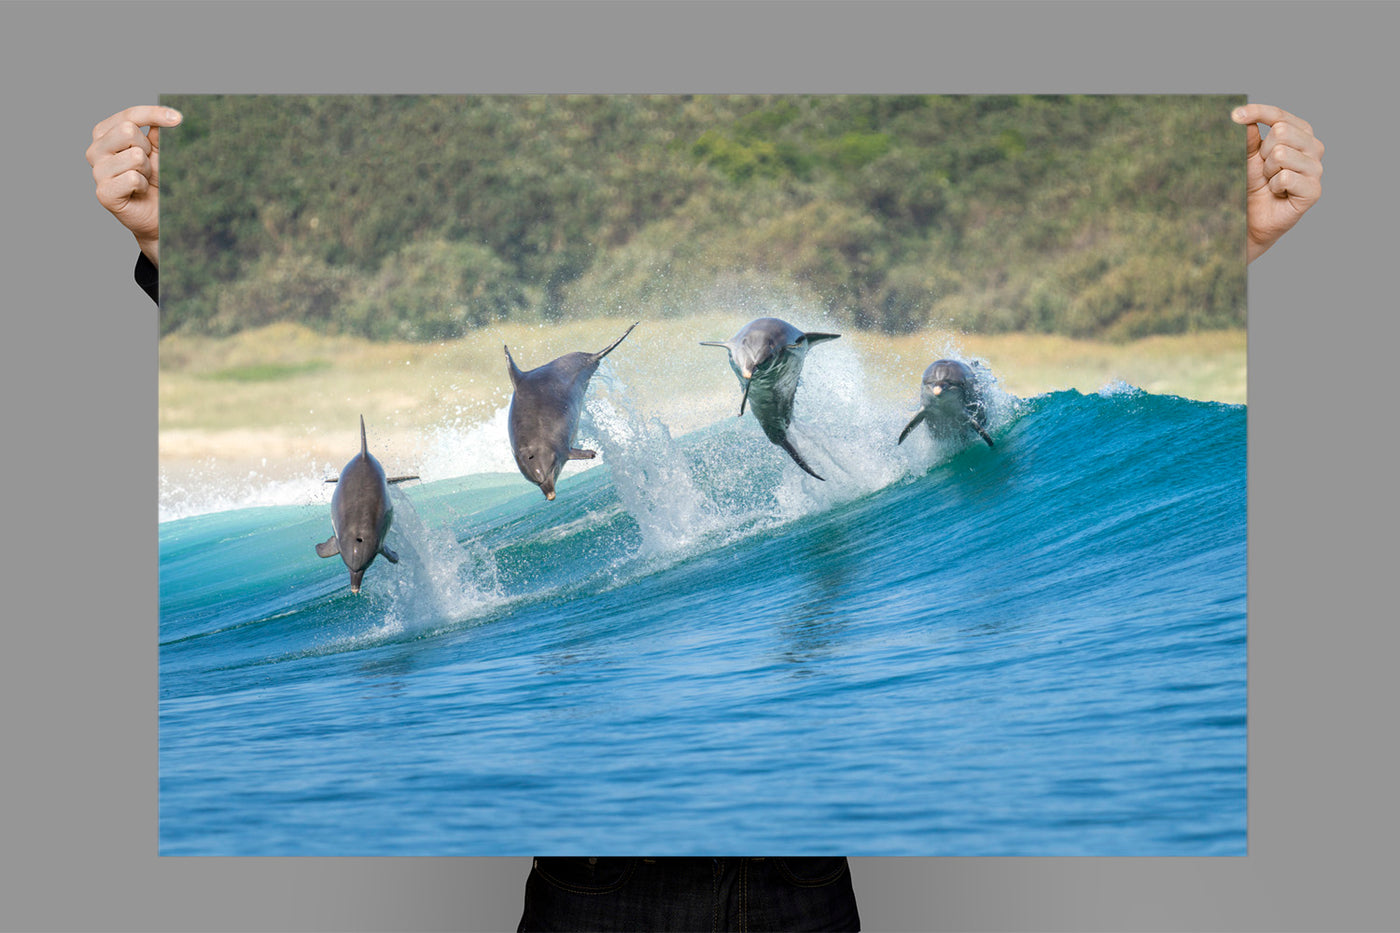 Awesome Foursome | Byron Bay – Wildlife Photography Prints & Frames